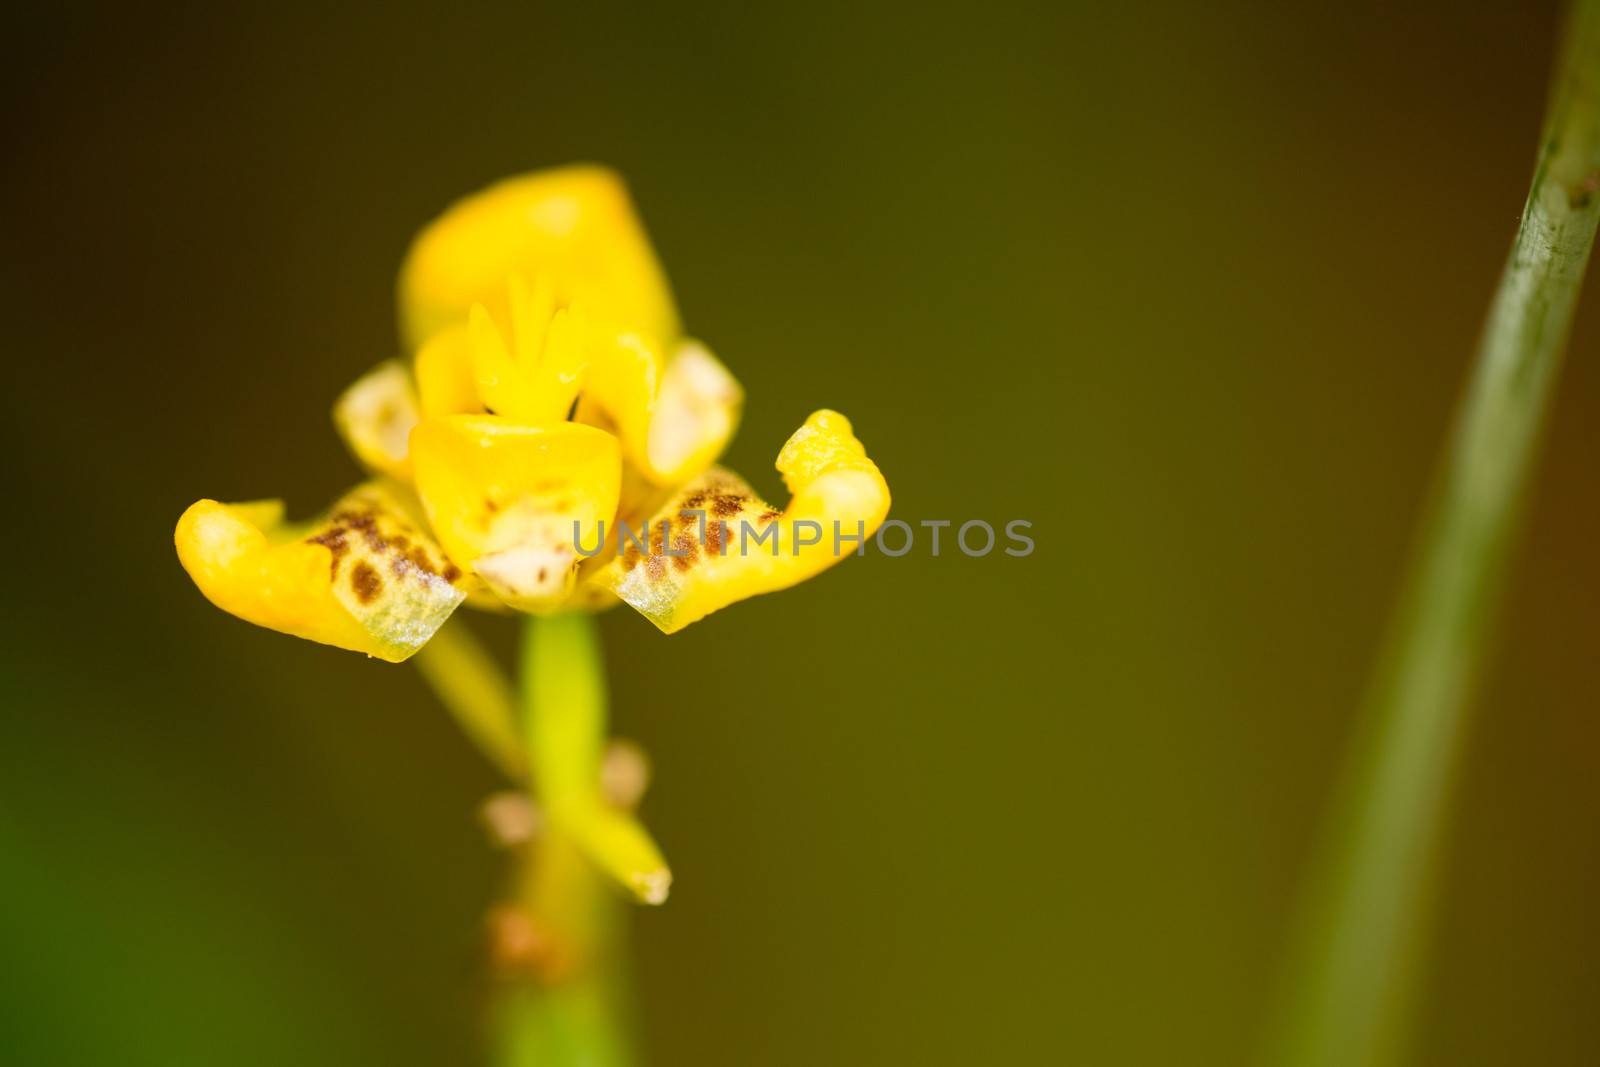 Tropical flower in Costa Rica with blurred background